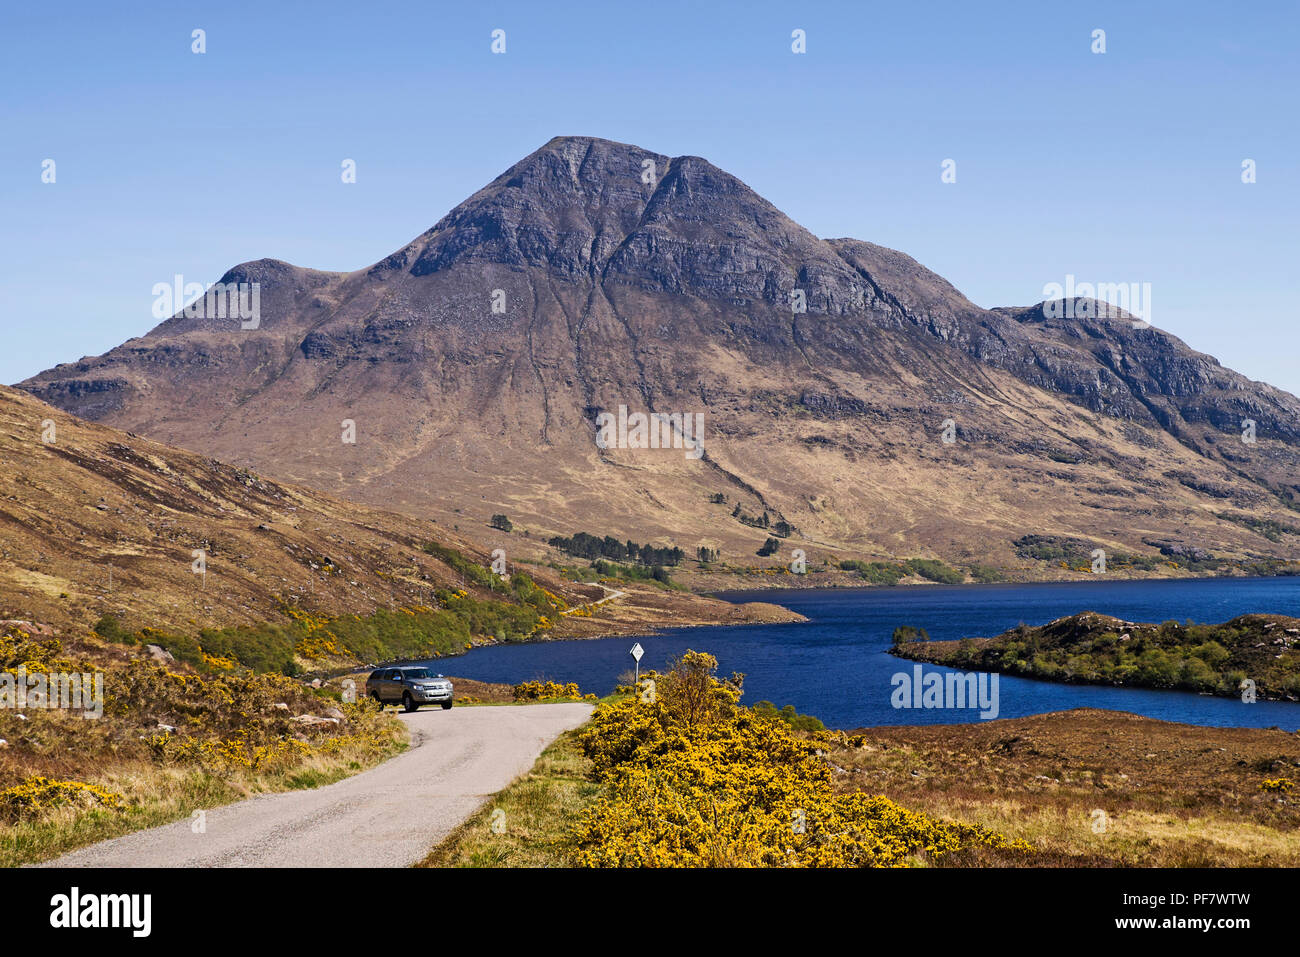 Cul Beag and Loch Lurgainn seen from the scenic road to Achiltibuie, Coigach, Wester Ross, Scottish Highlands, Scotland UK Stock Photo